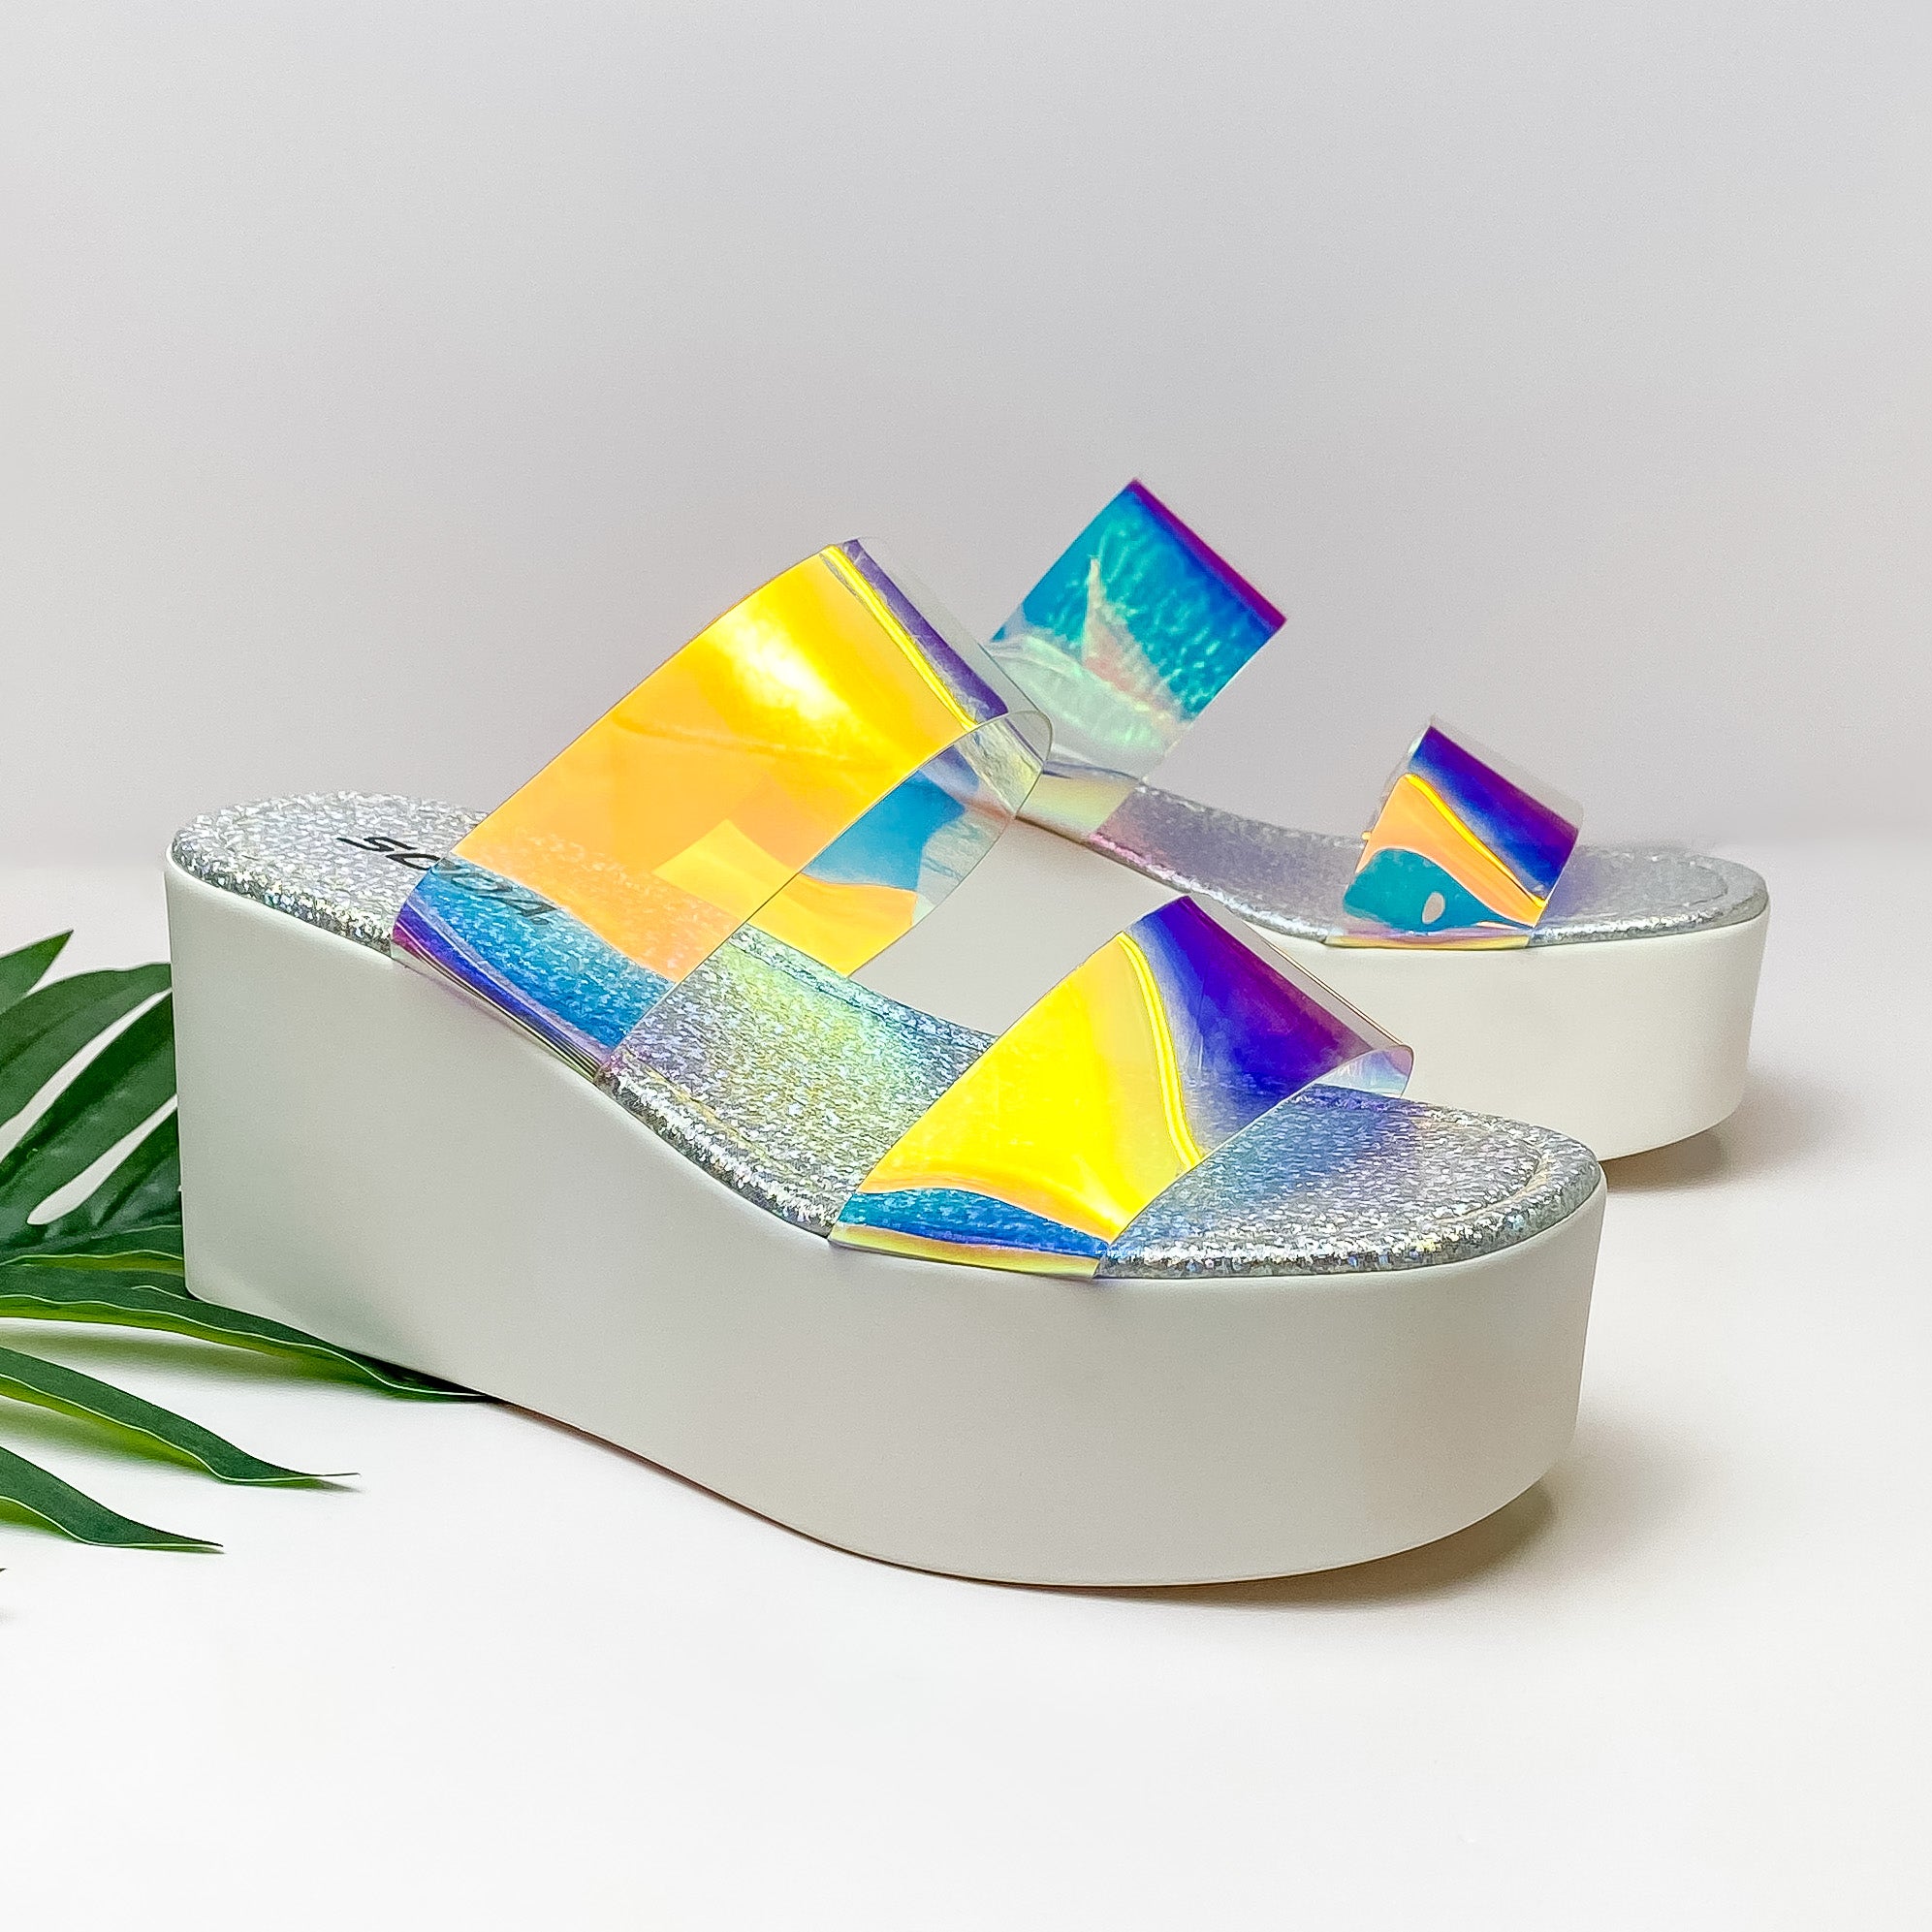 Feeling Brand New Two Strap White Platform Wedges in Iridescent